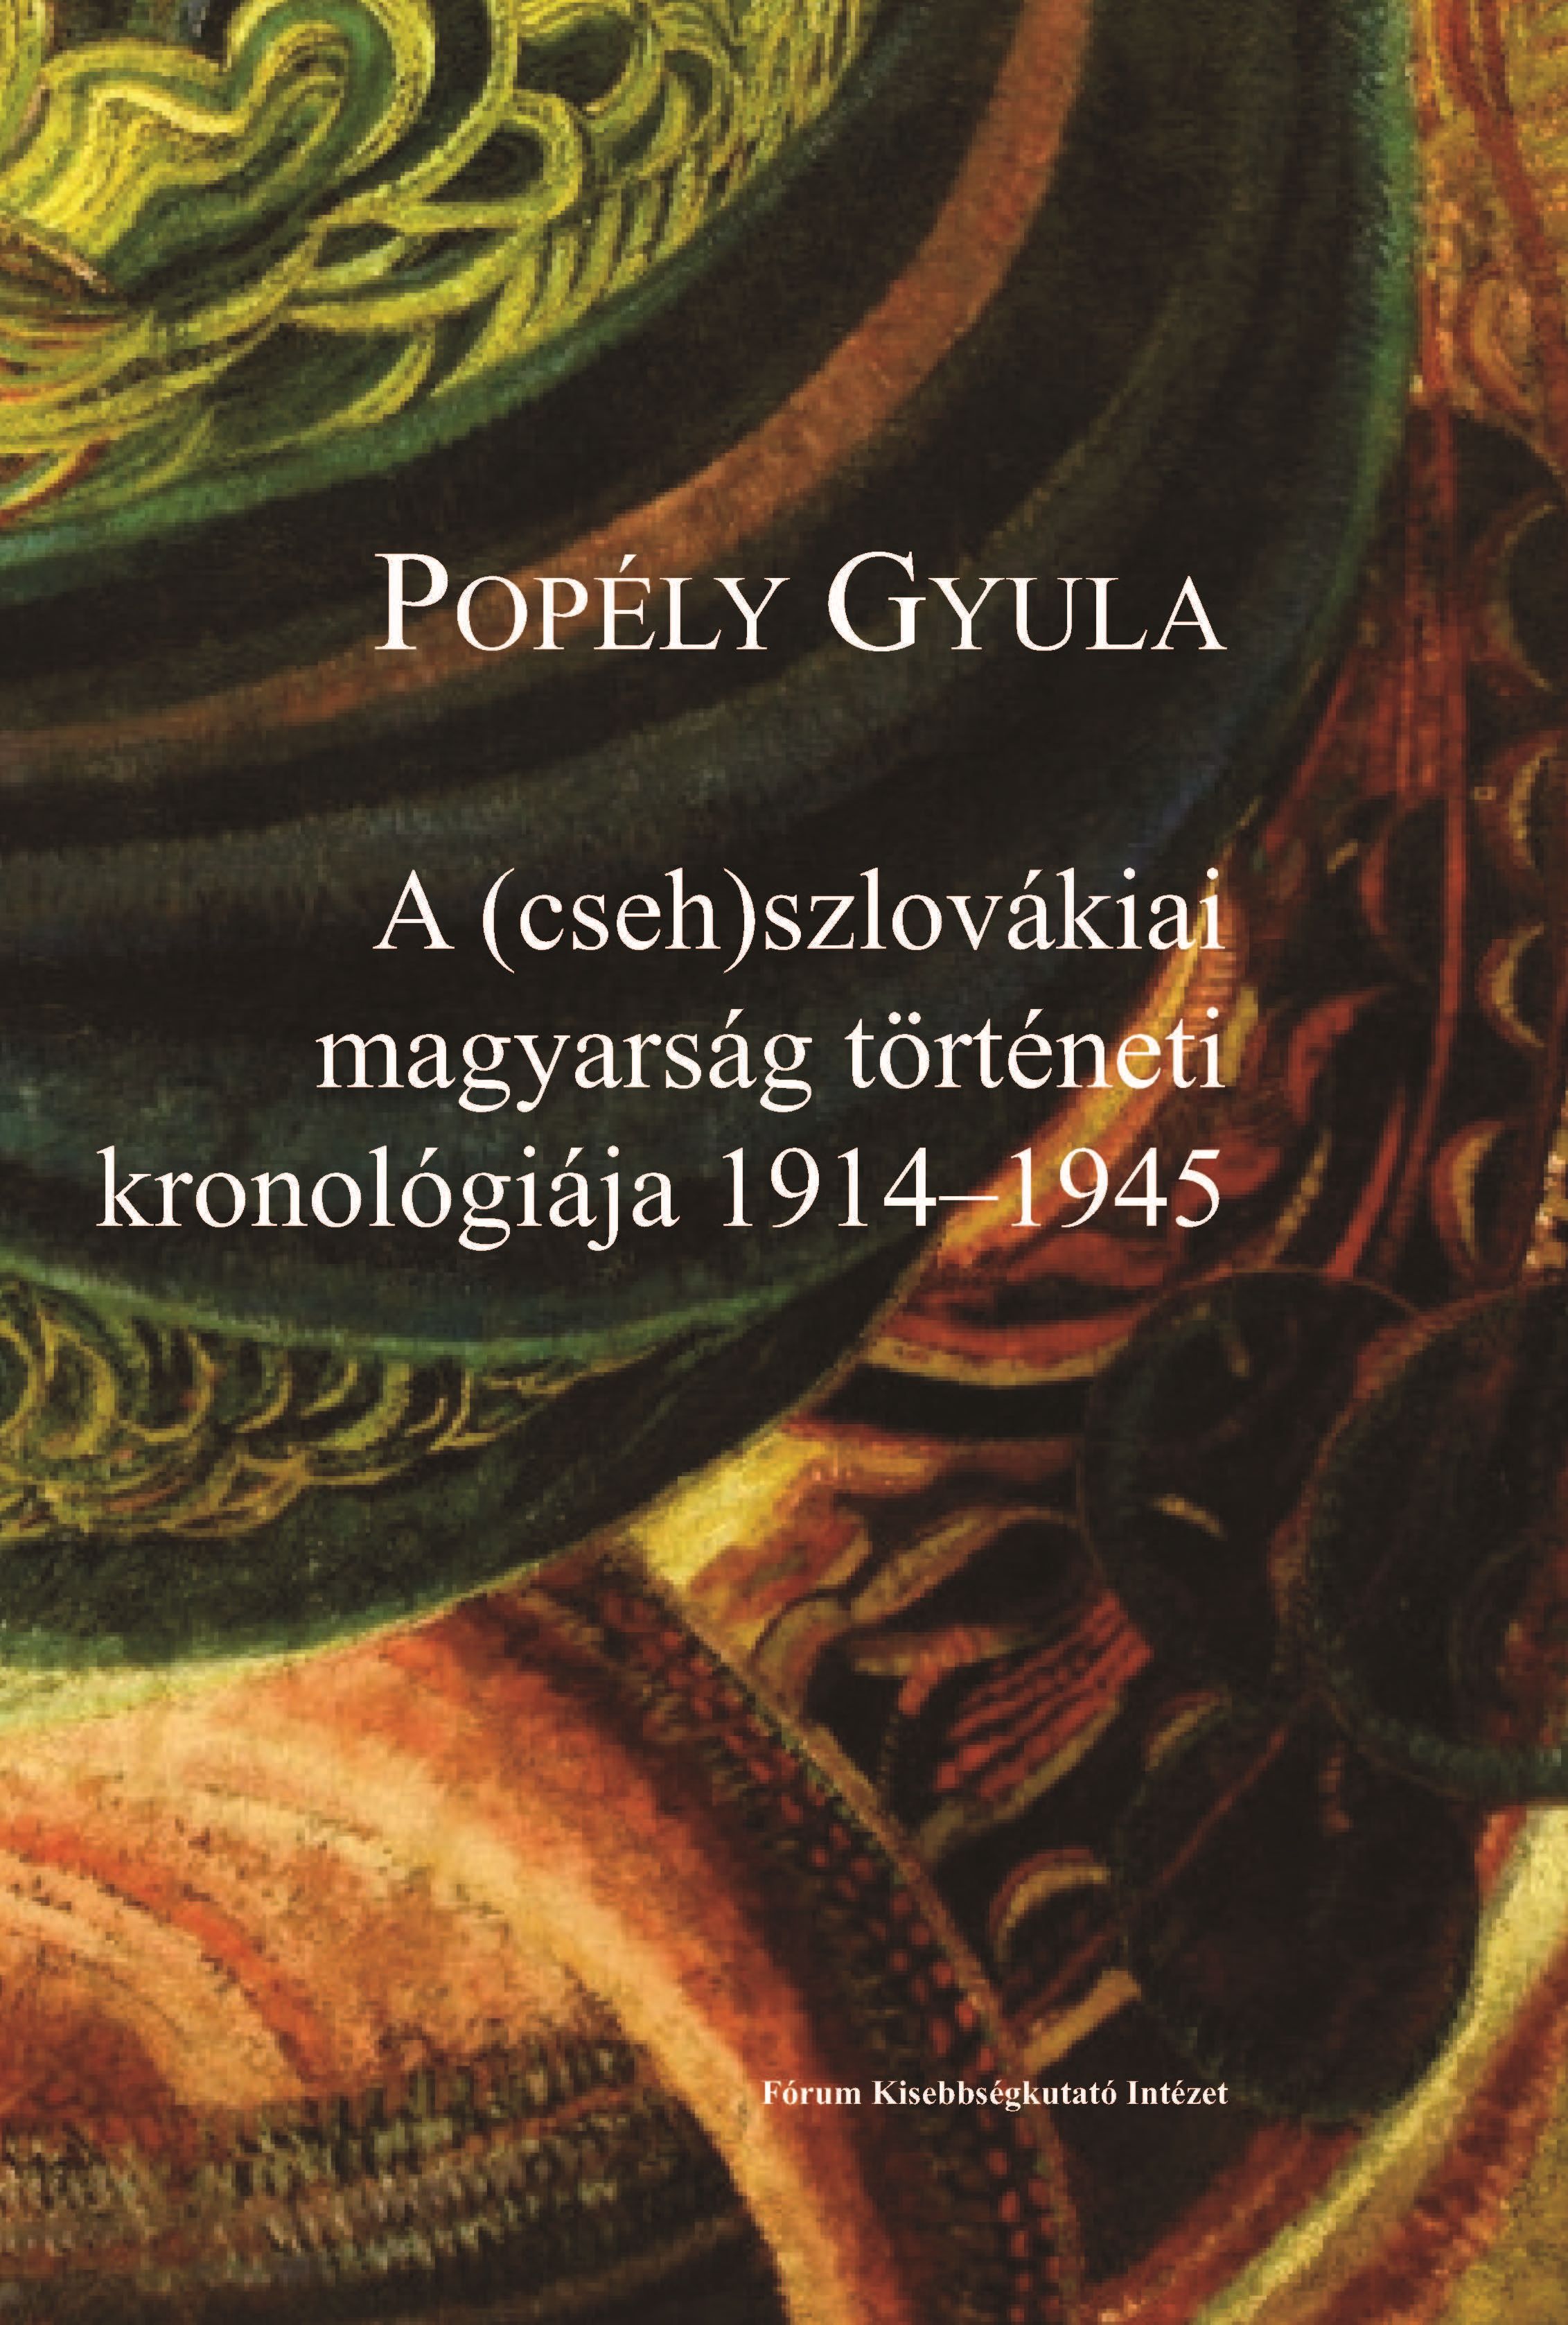 The Historical Chronology of Hungarians in (Czecho)Slovakia in the Period of 1914–1945